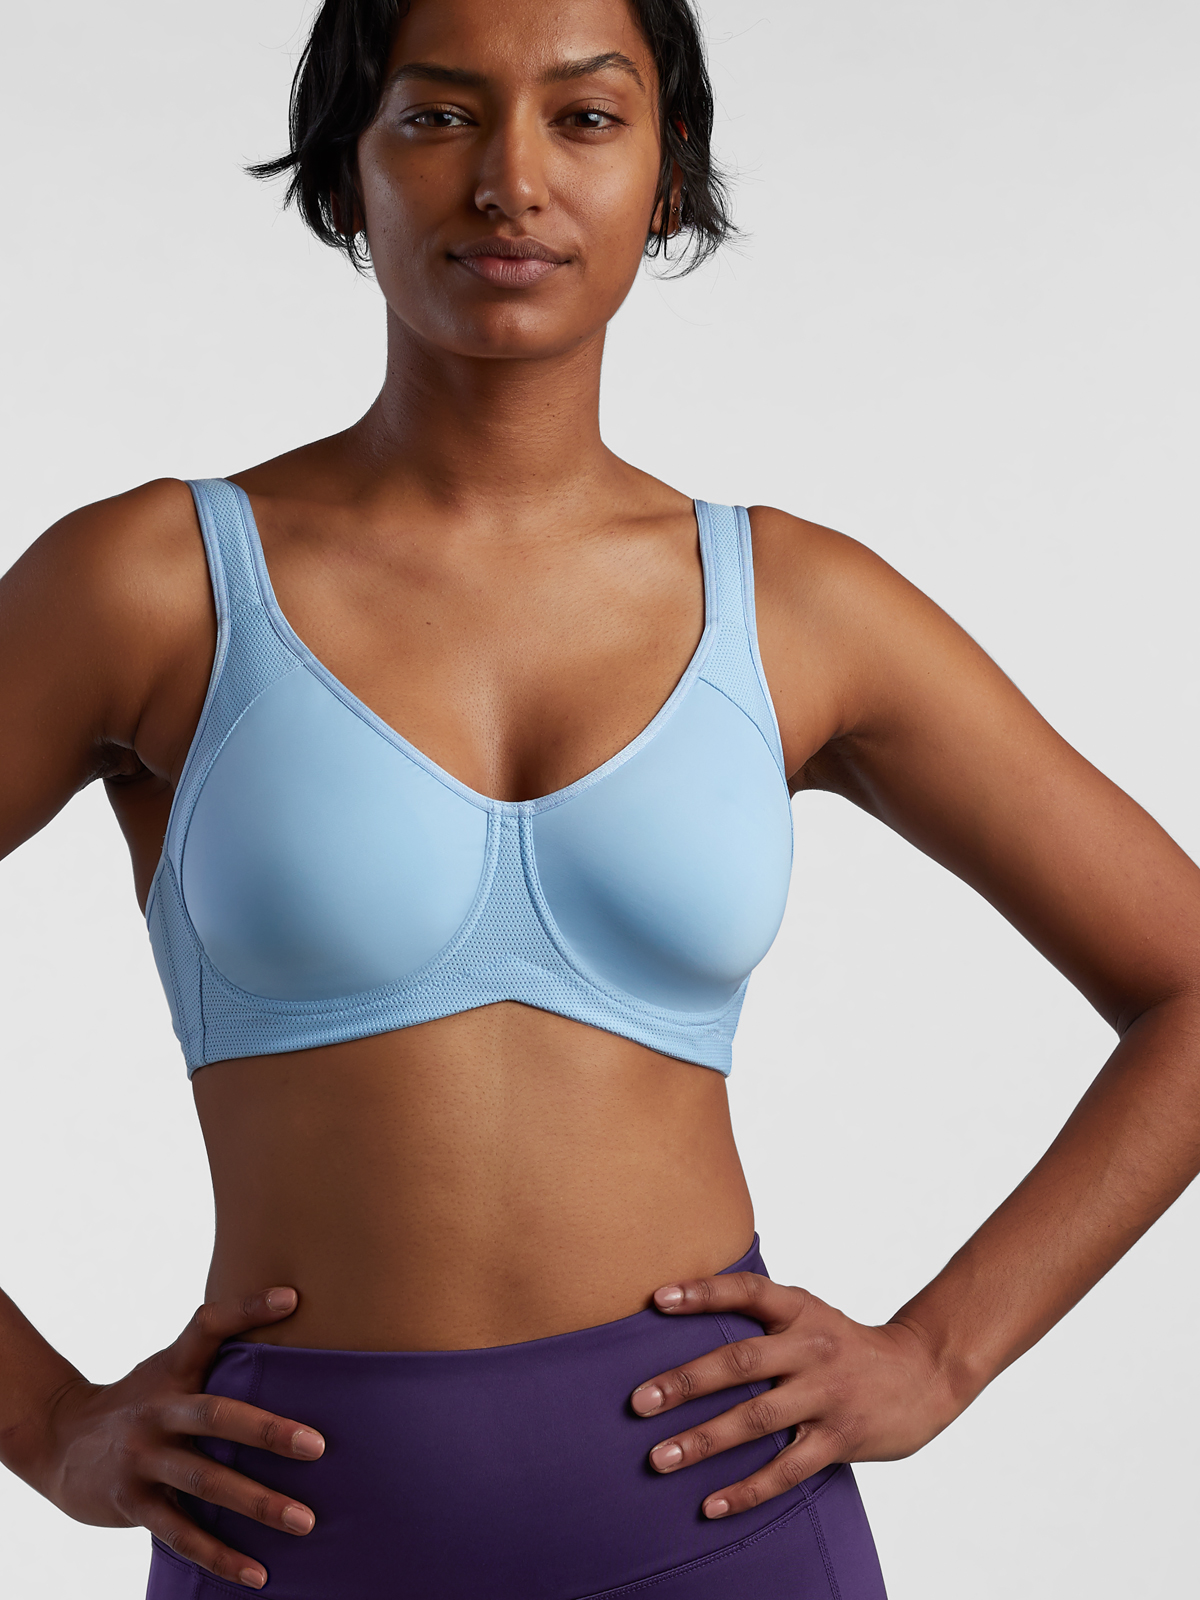 9 Cute Bras For Sizes DD & Up, Because No One Should Have To